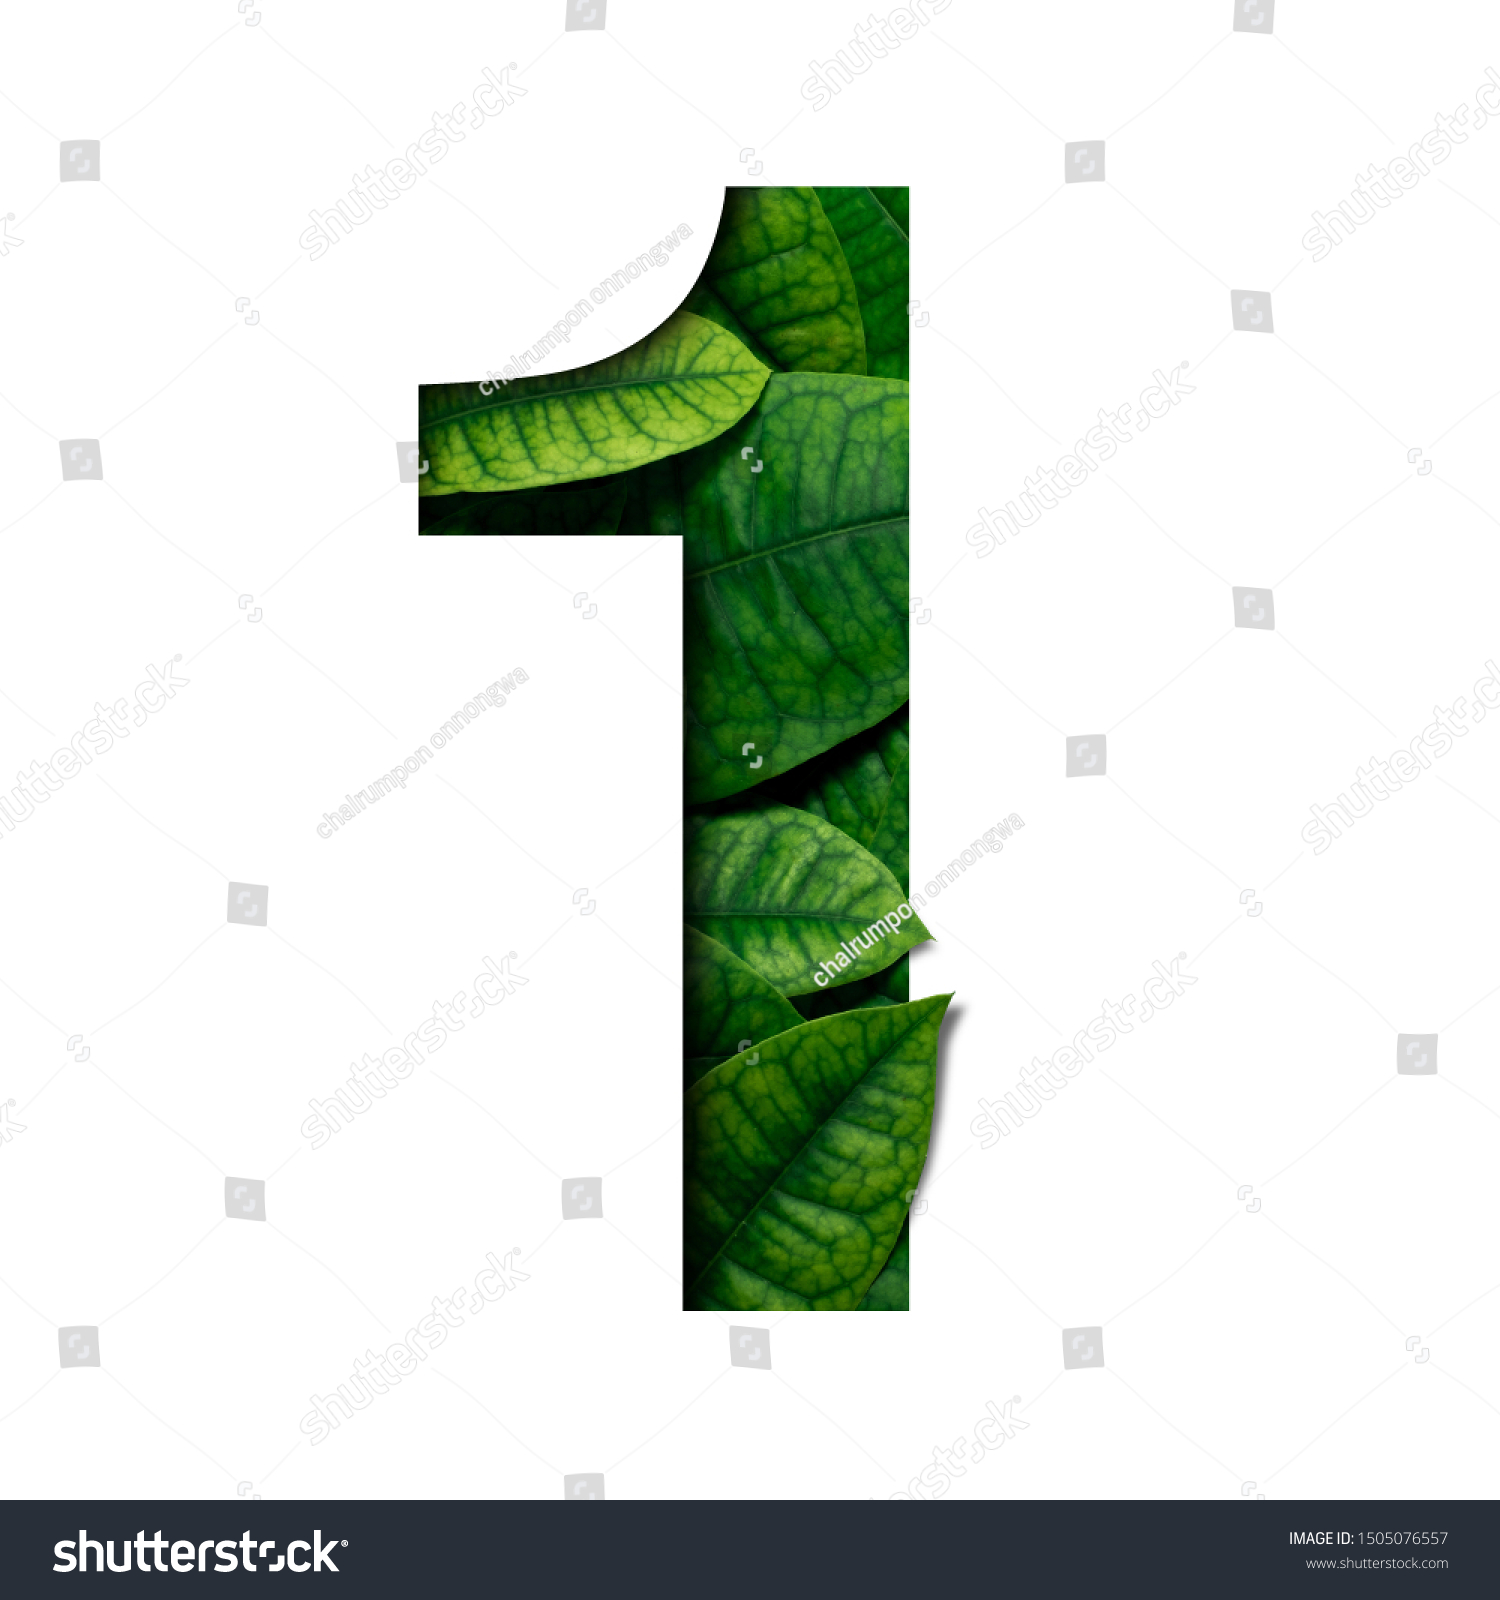 9,342 Number 1 leaves Images, Stock Photos & Vectors | Shutterstock